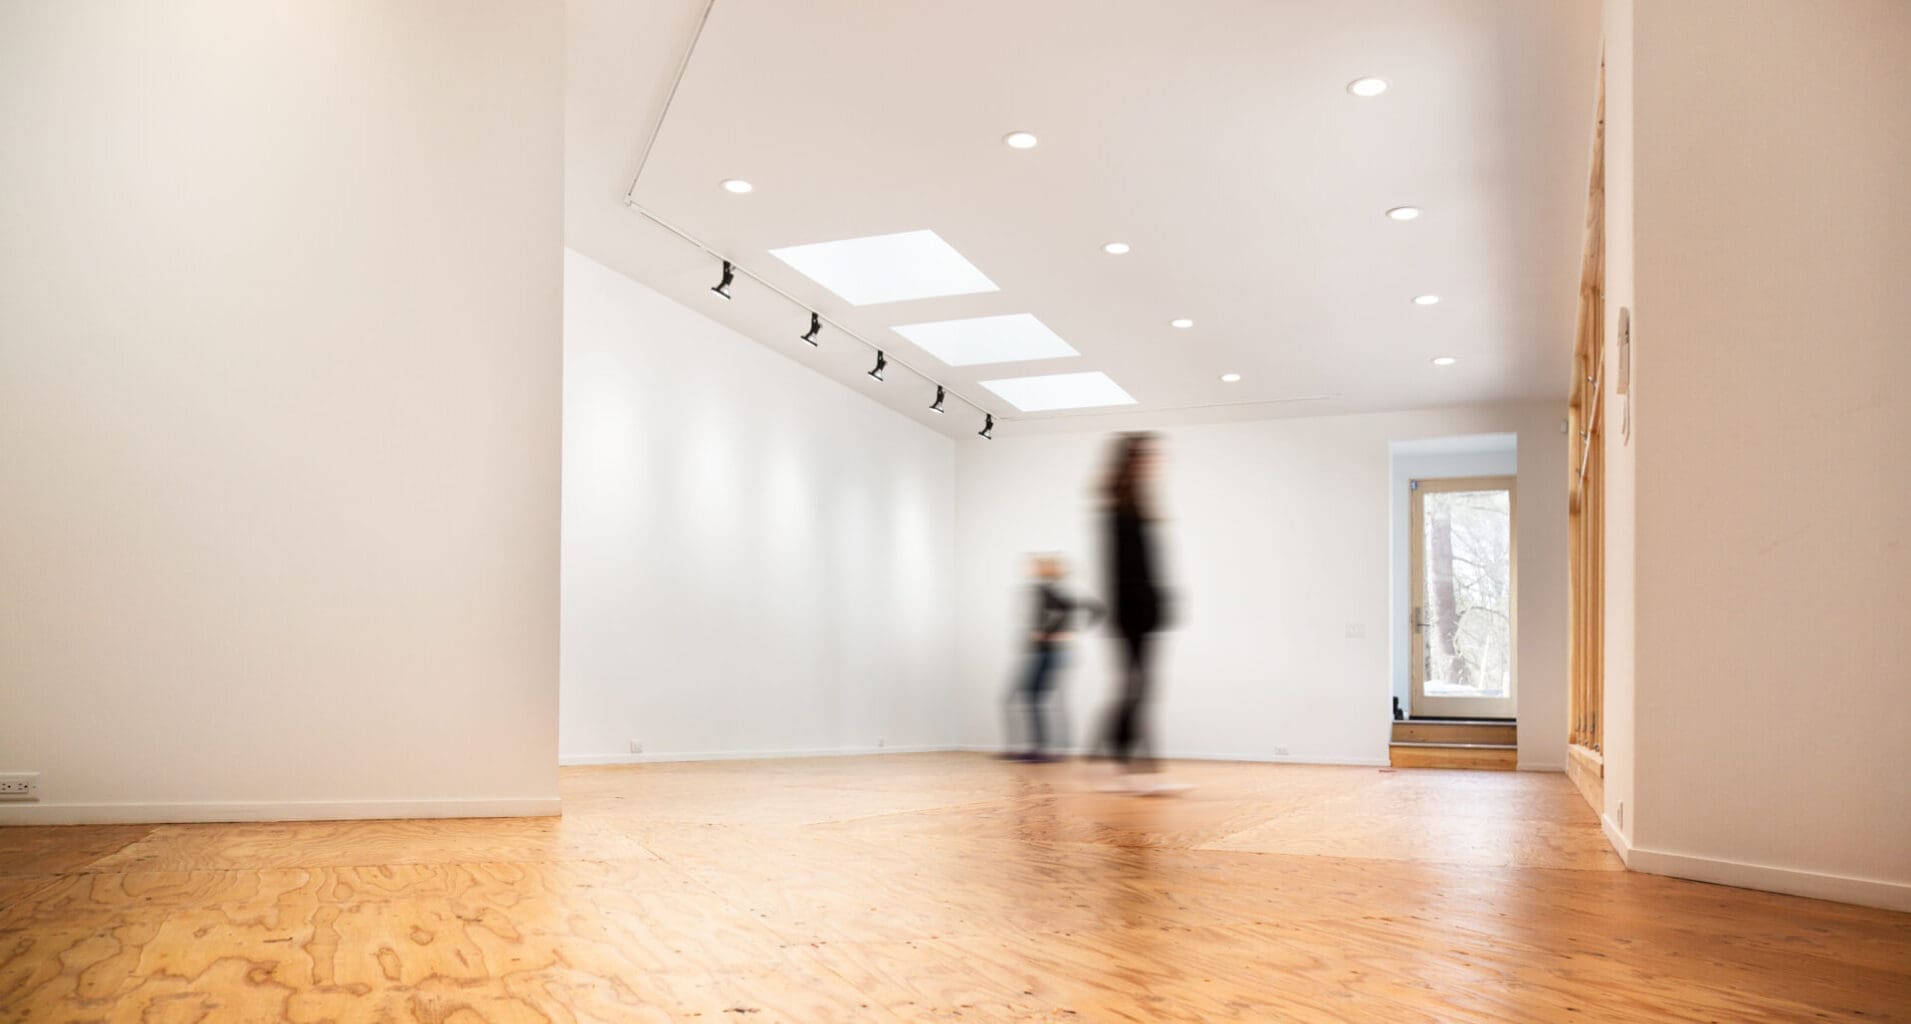 A photo of an open gallery space with white walls, skylights, recessed lighting, and spotlights.